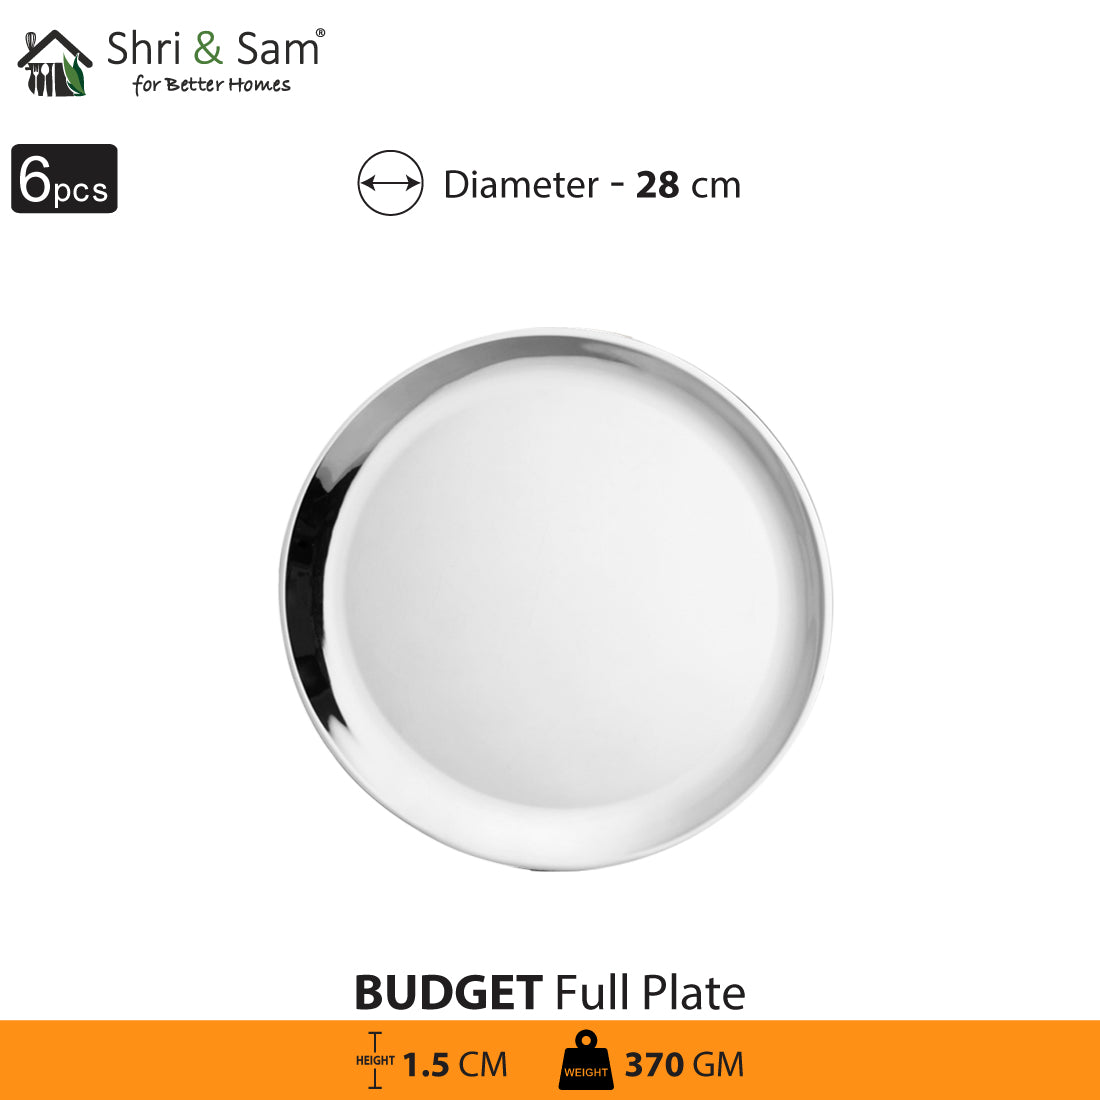 Stainless Steel 6 PCS Full Plate Budget